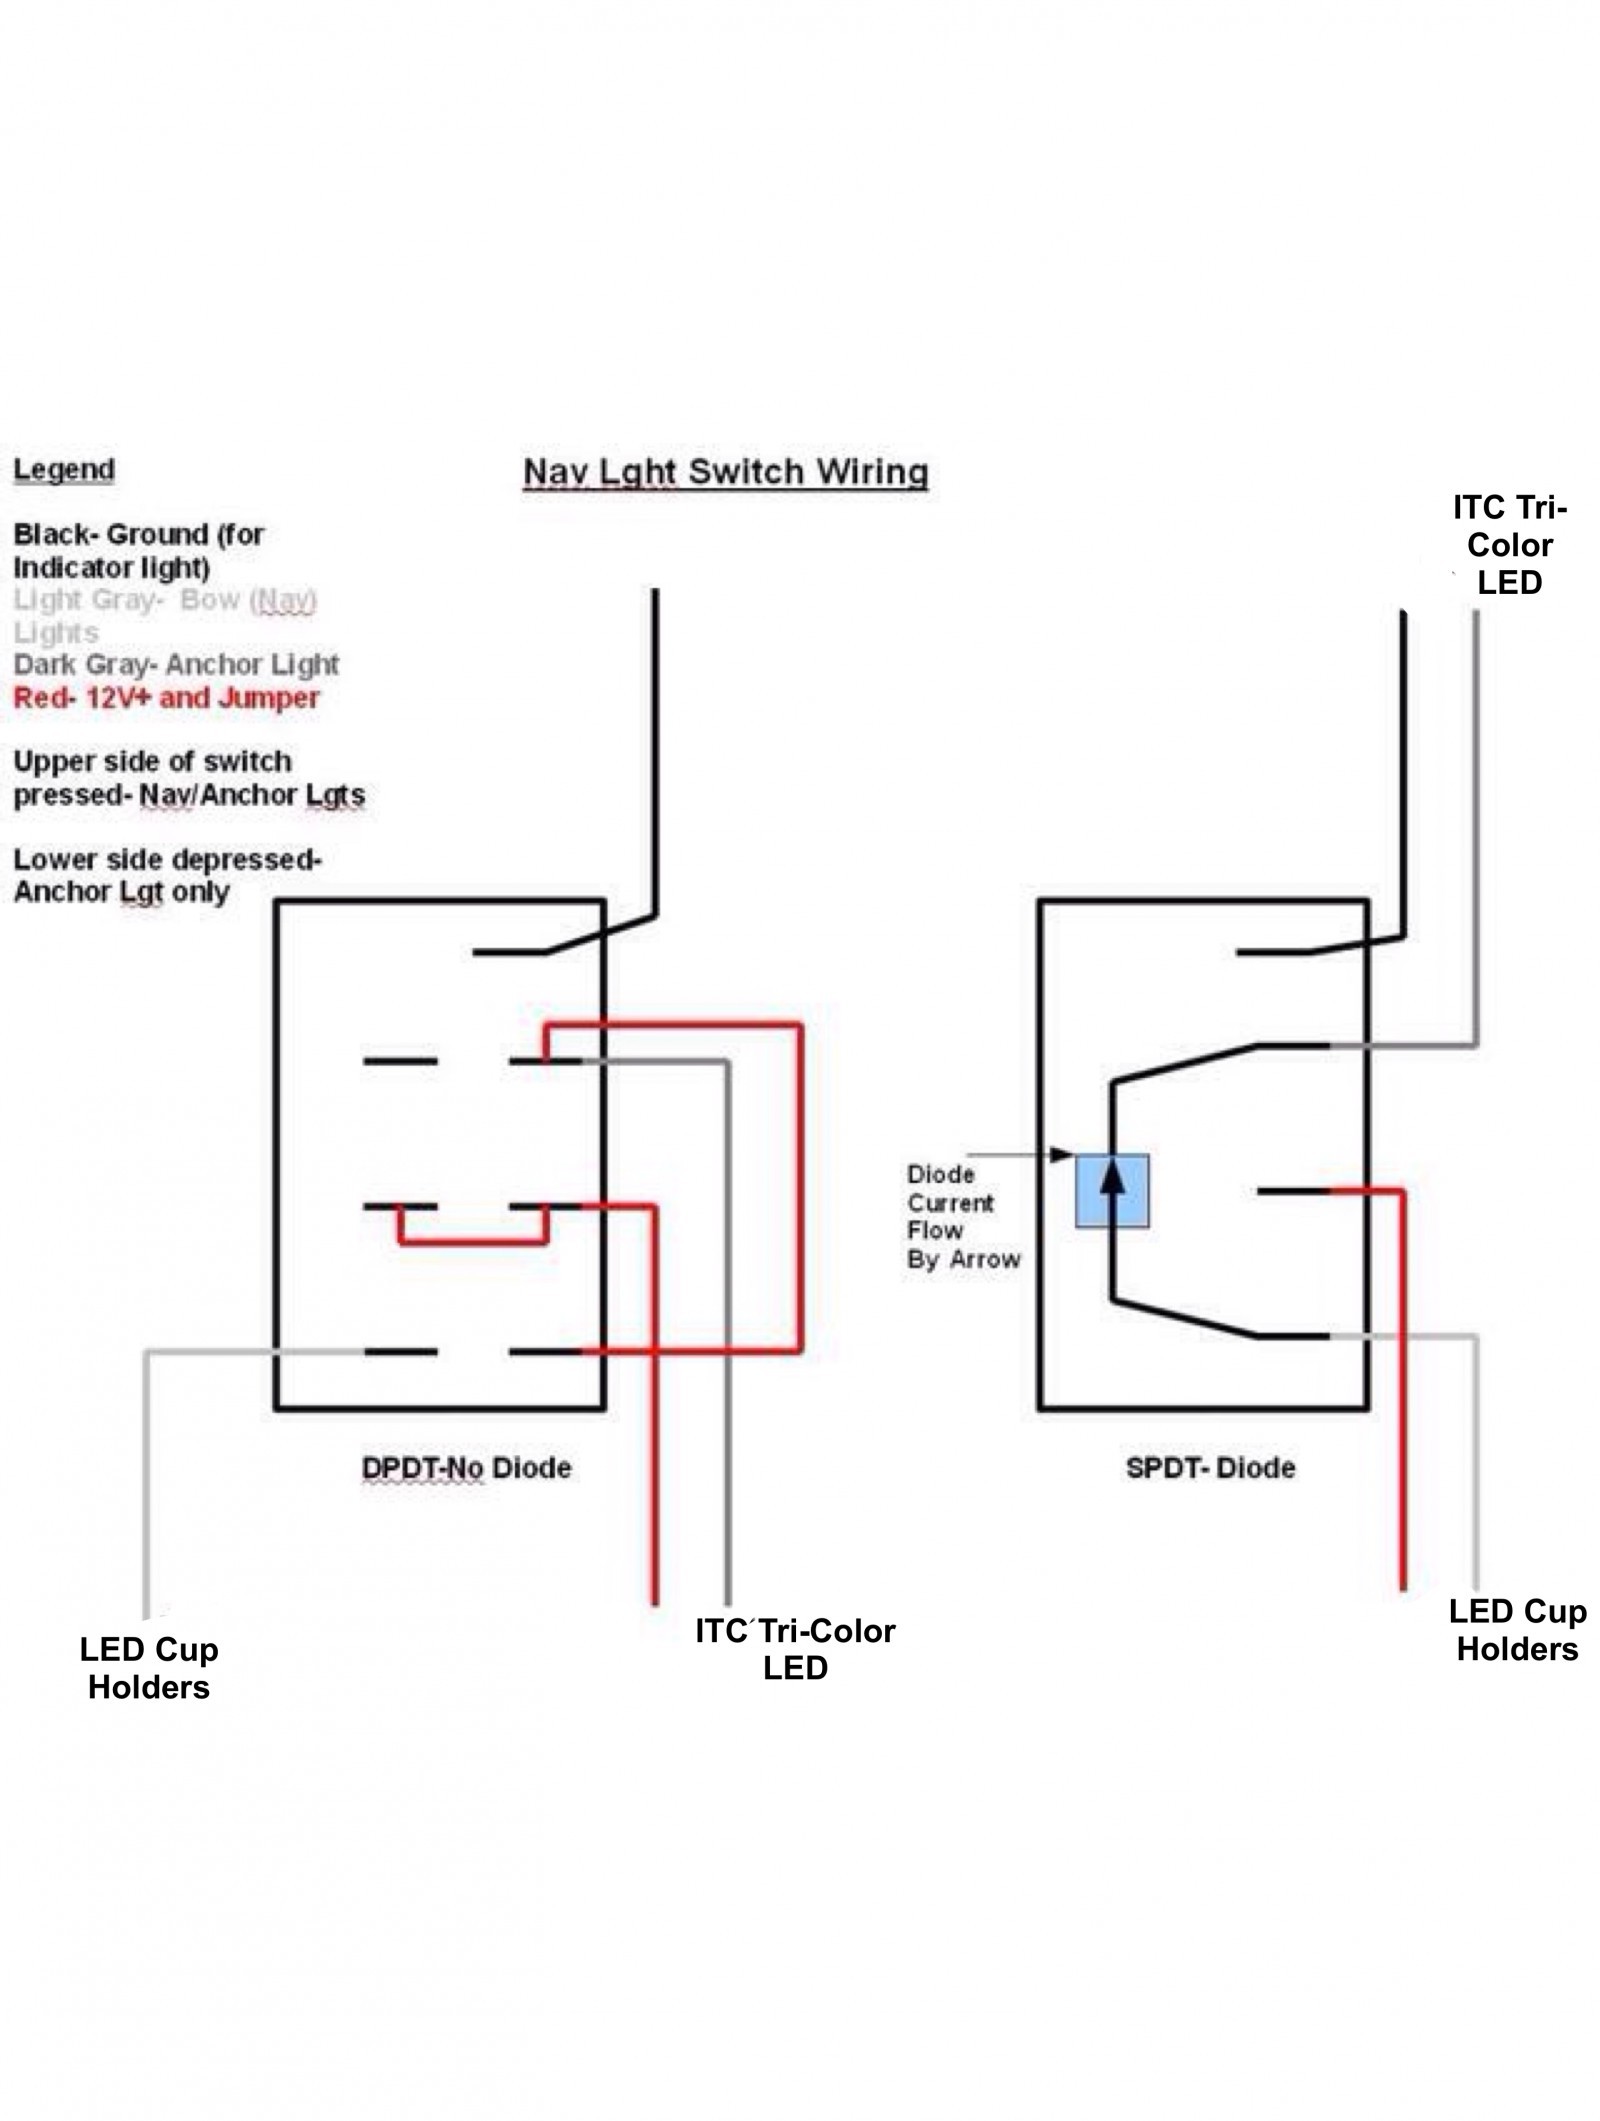 double switch wiring diagram wellread me installing a light switch wiring diagram double switch wiring diagram